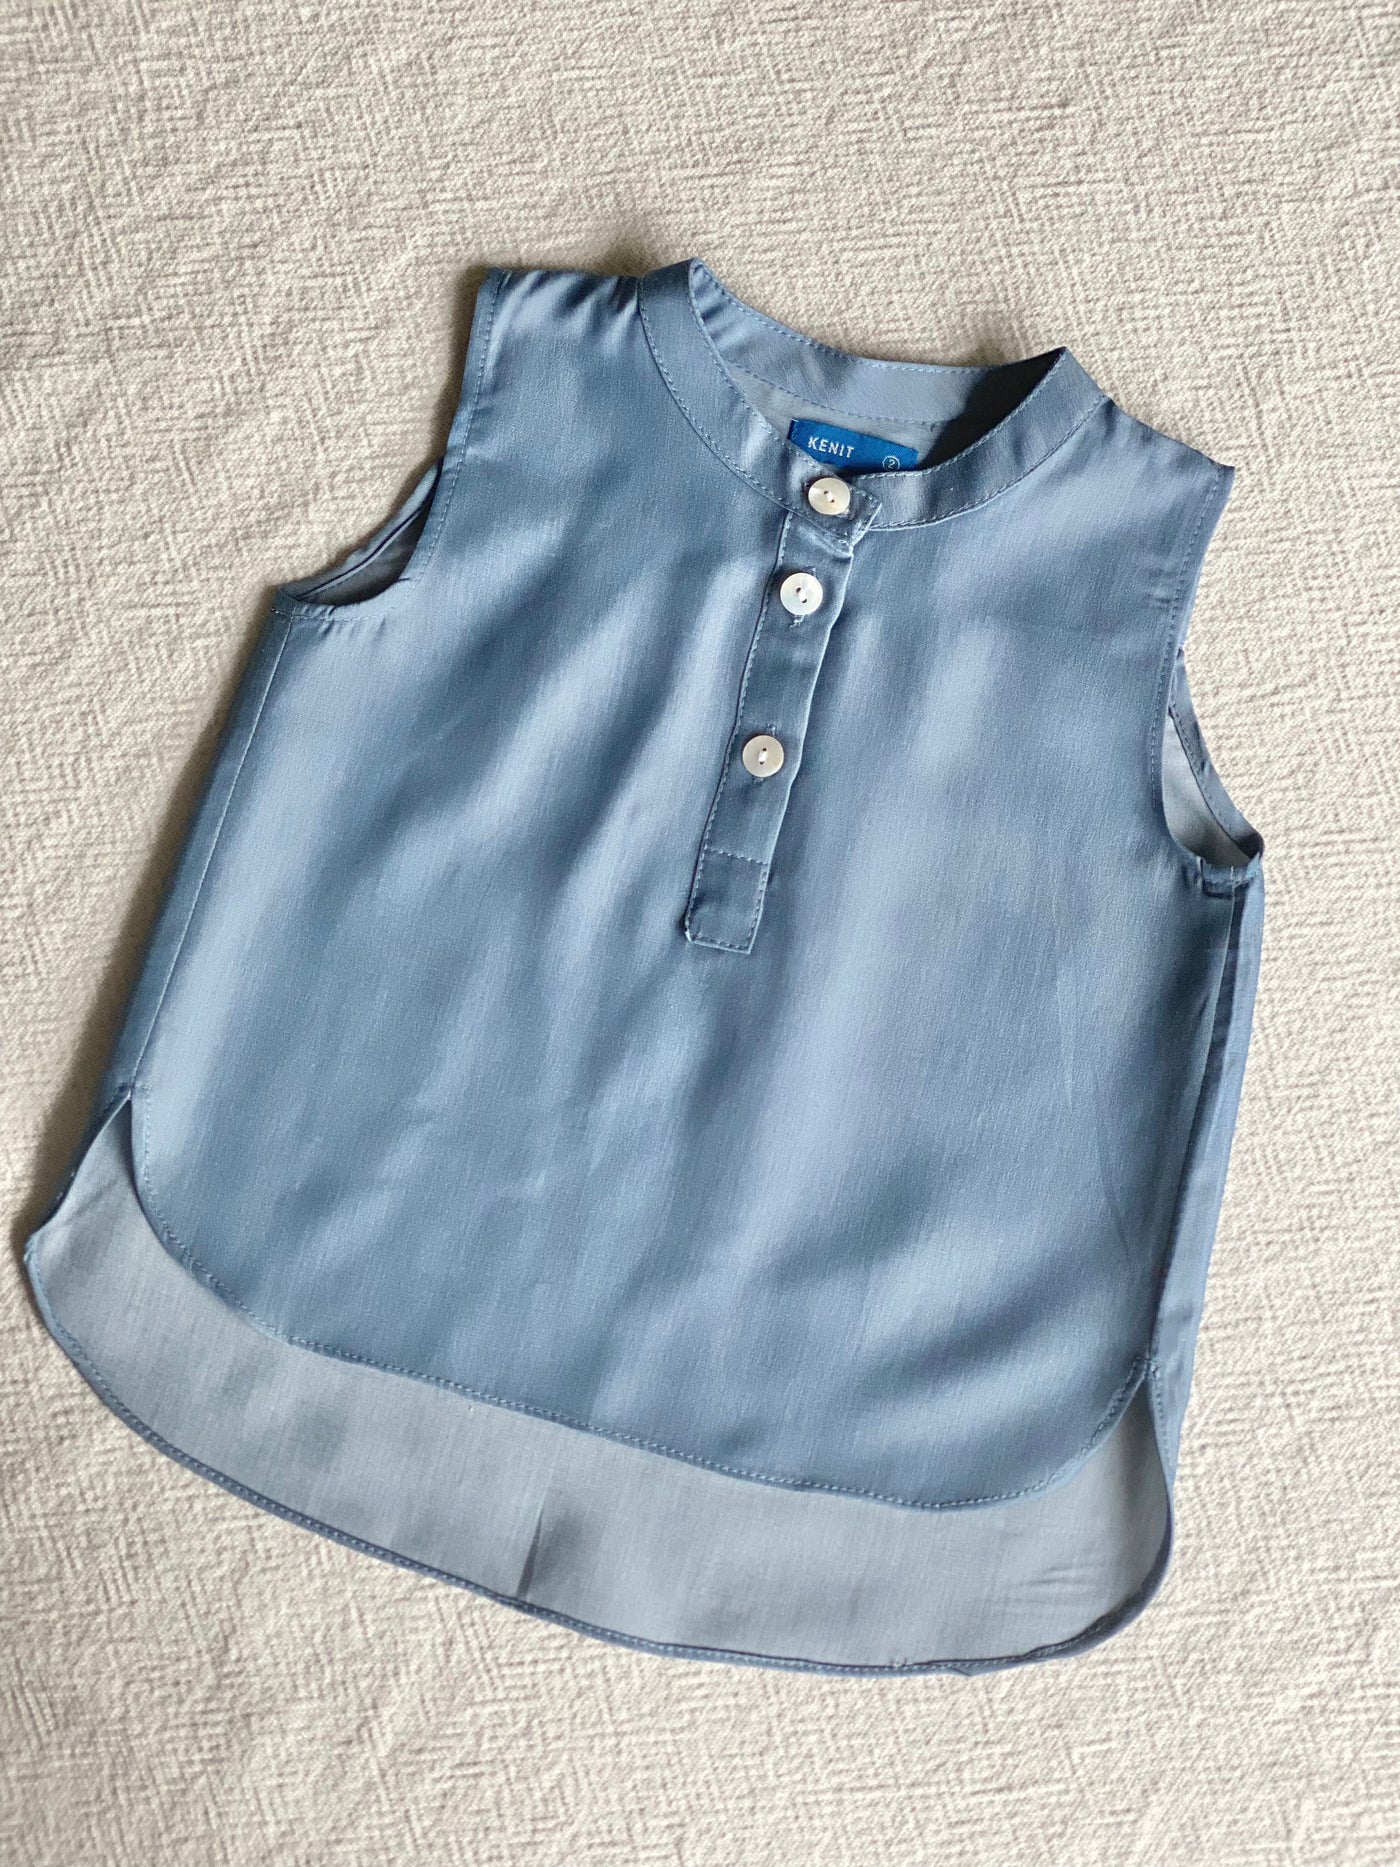 CLAIRE Asymmetric Blouse in Dusty Blue (Top Only)